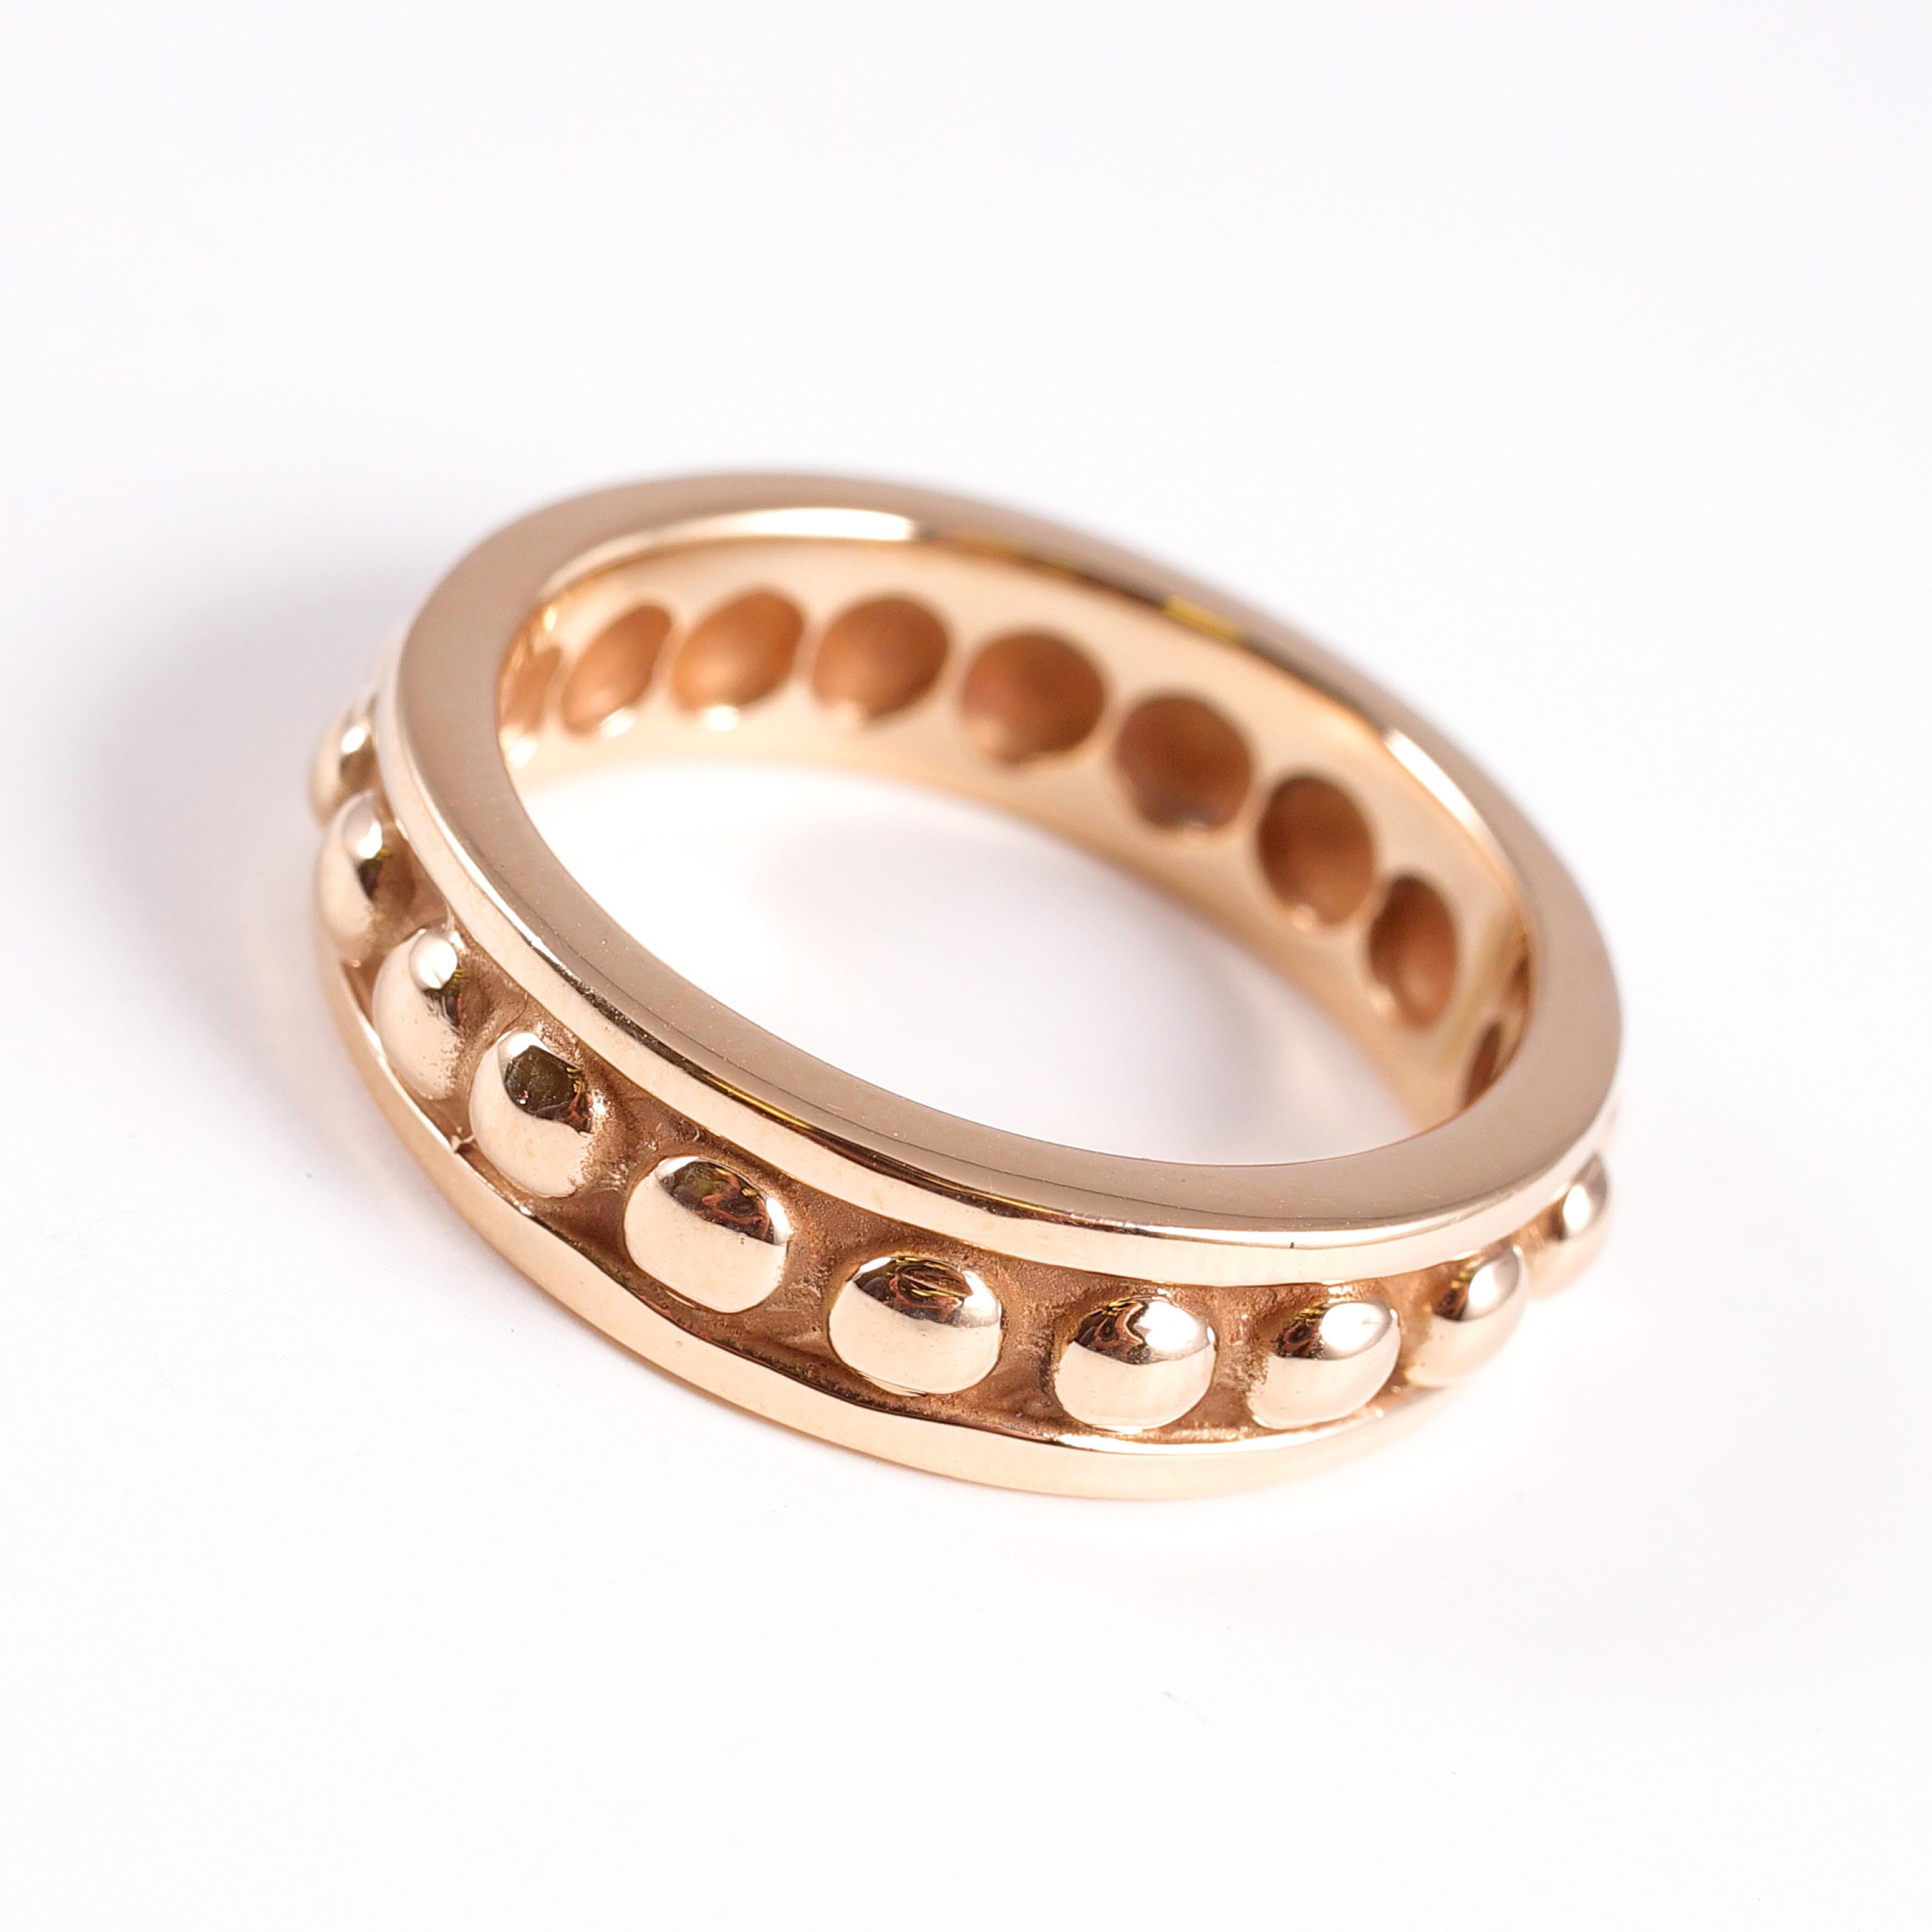 Stylish band from Mignon Faget with bead detail in 14 karat gold.  Size 11.